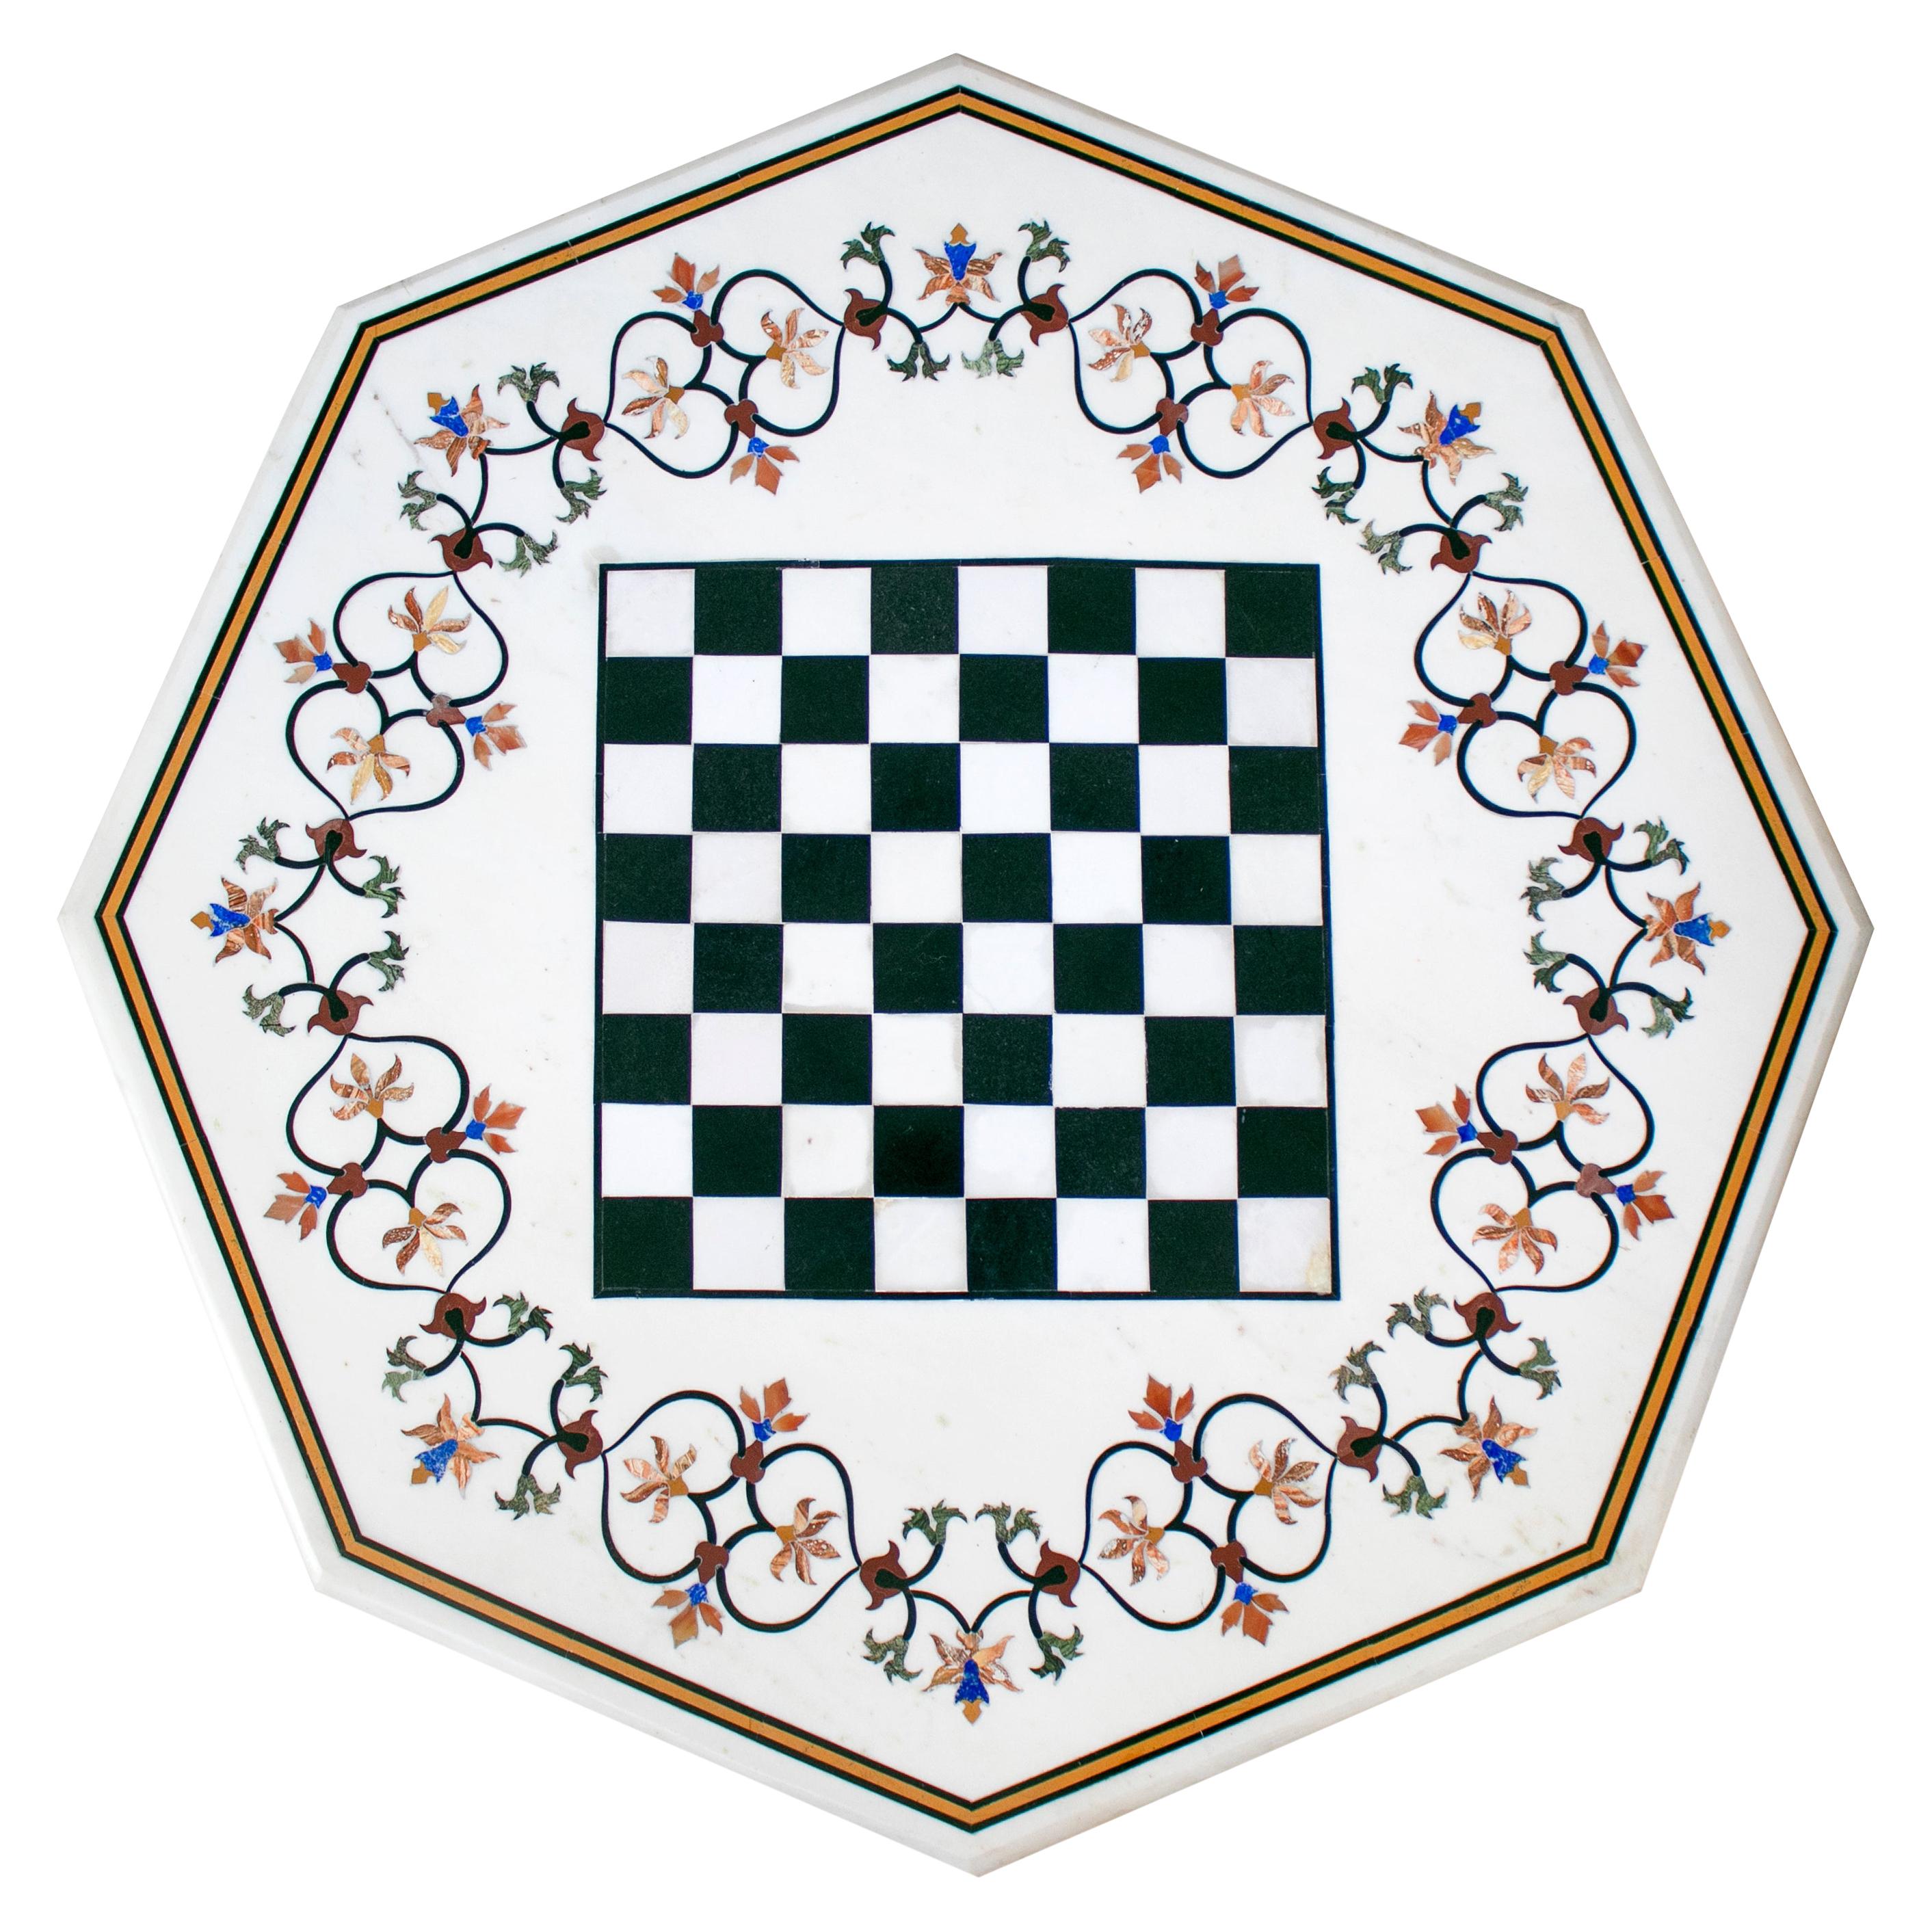 Octagonal Pietre Dure Marble Inlay Mosaic Chess Table Top with Lapis and Jade